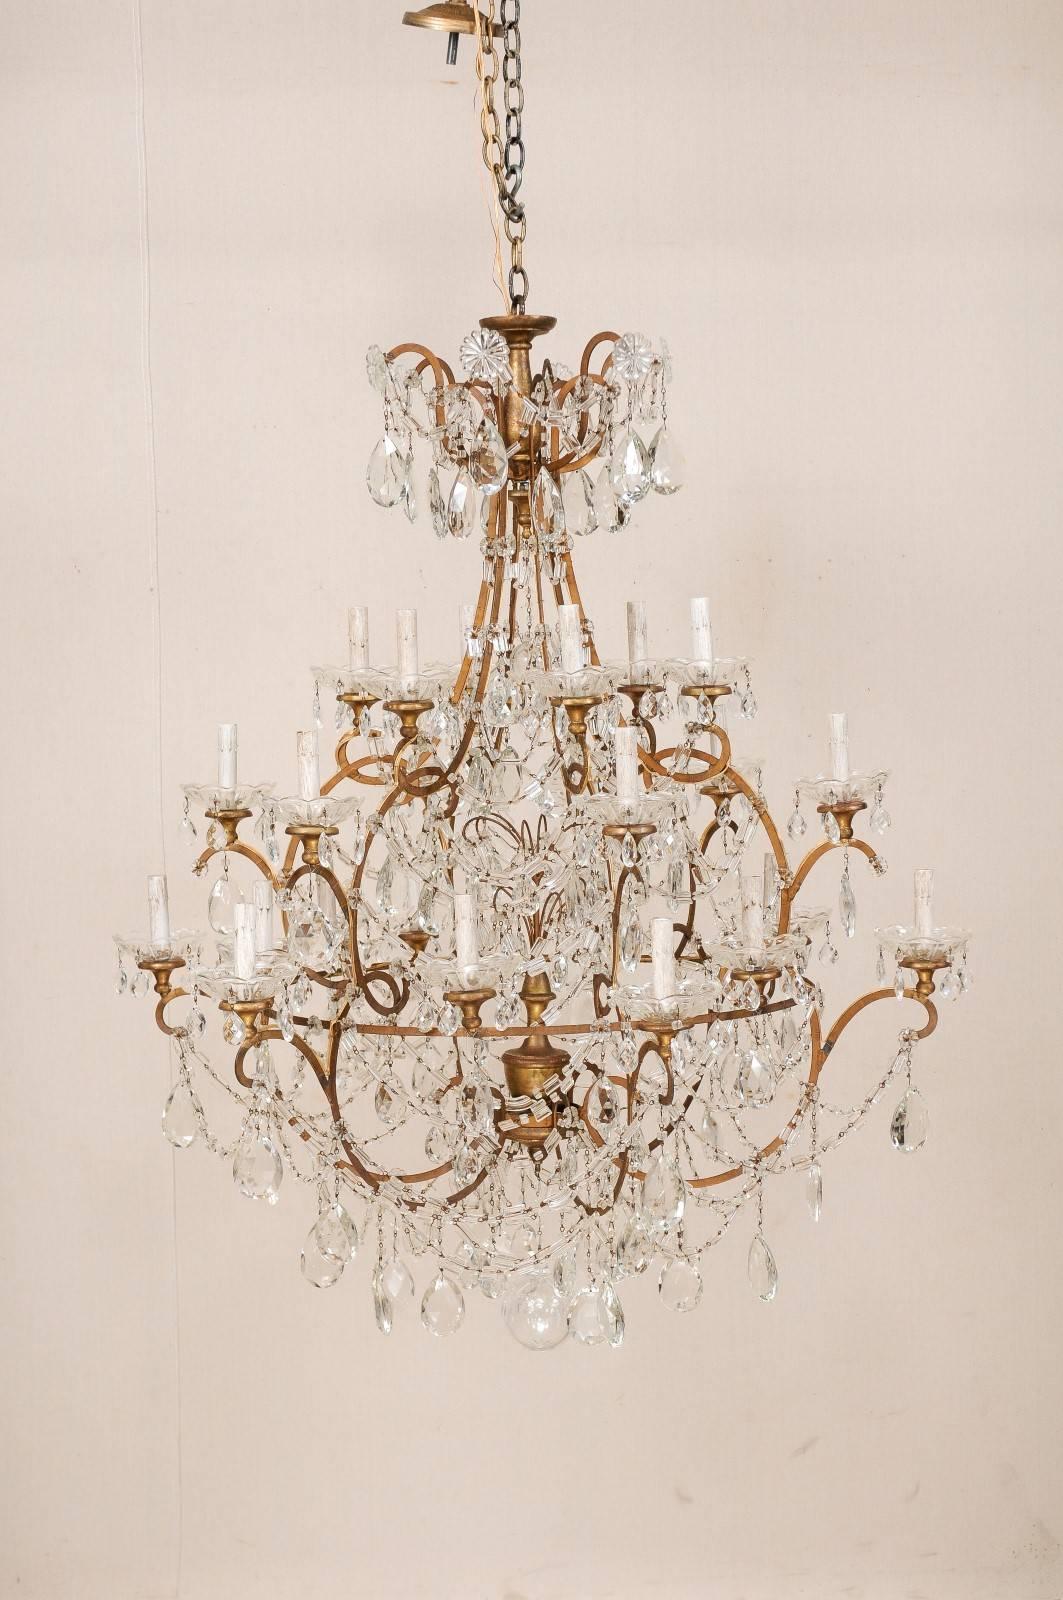 An Italian grand scale three-tier crystal chandelier. This Mid-Century Italian chandelier features an awe-inspiring twenty-four-lights displayed over three-tiers. The top is adorned with a crystal waterfall crown, with a series of flower shaped